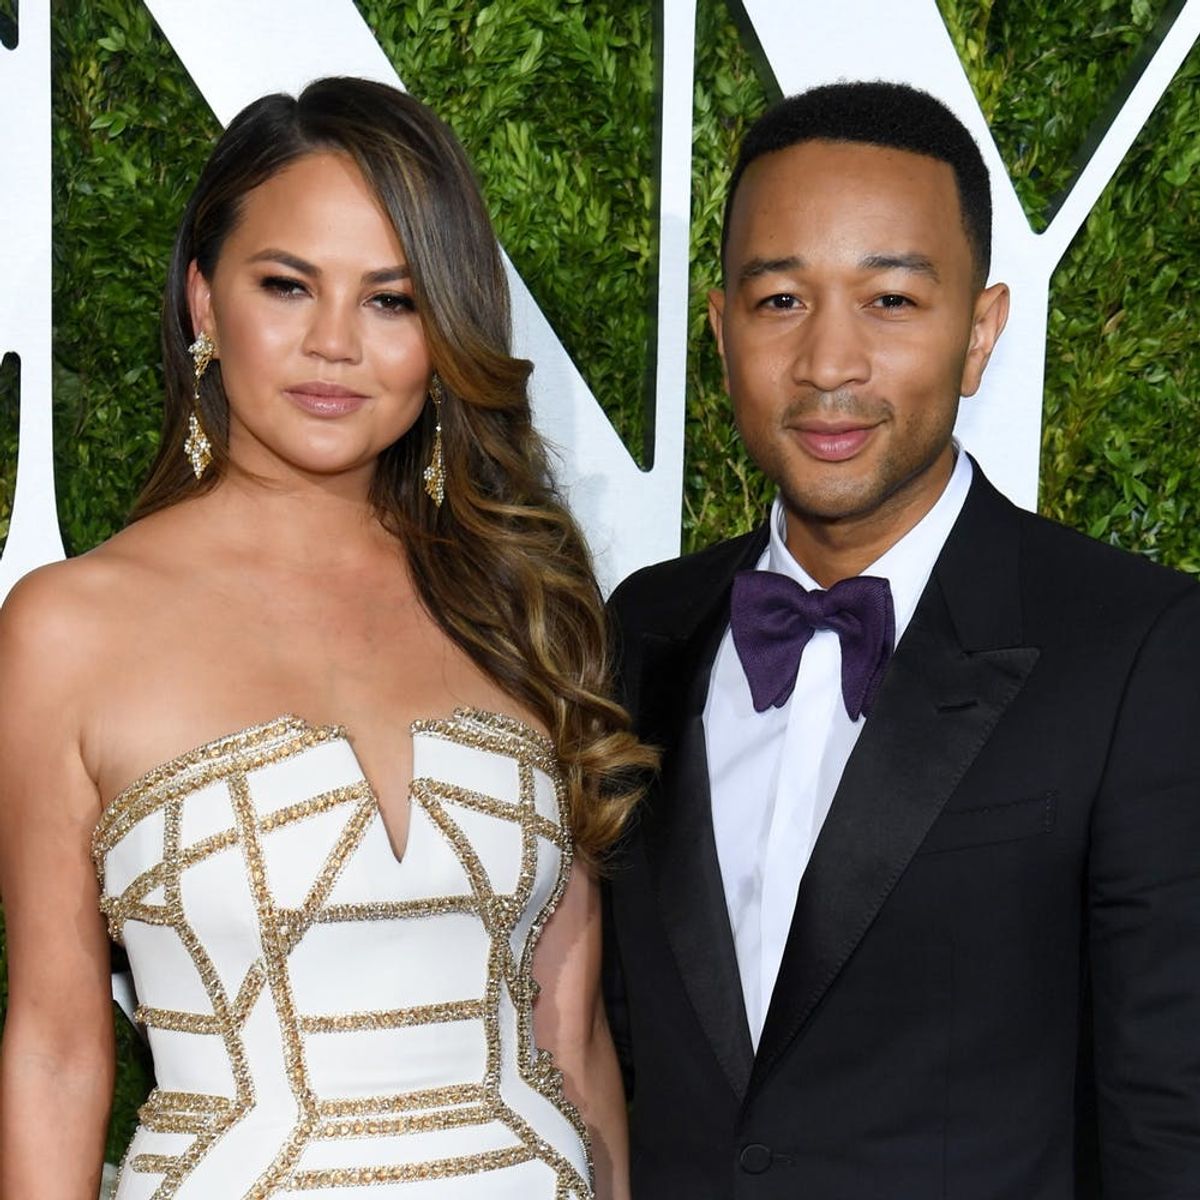 Chrissy Teigen Gushing Over John Legend on Father’s Day Will Make Your Heart Burst With Joy